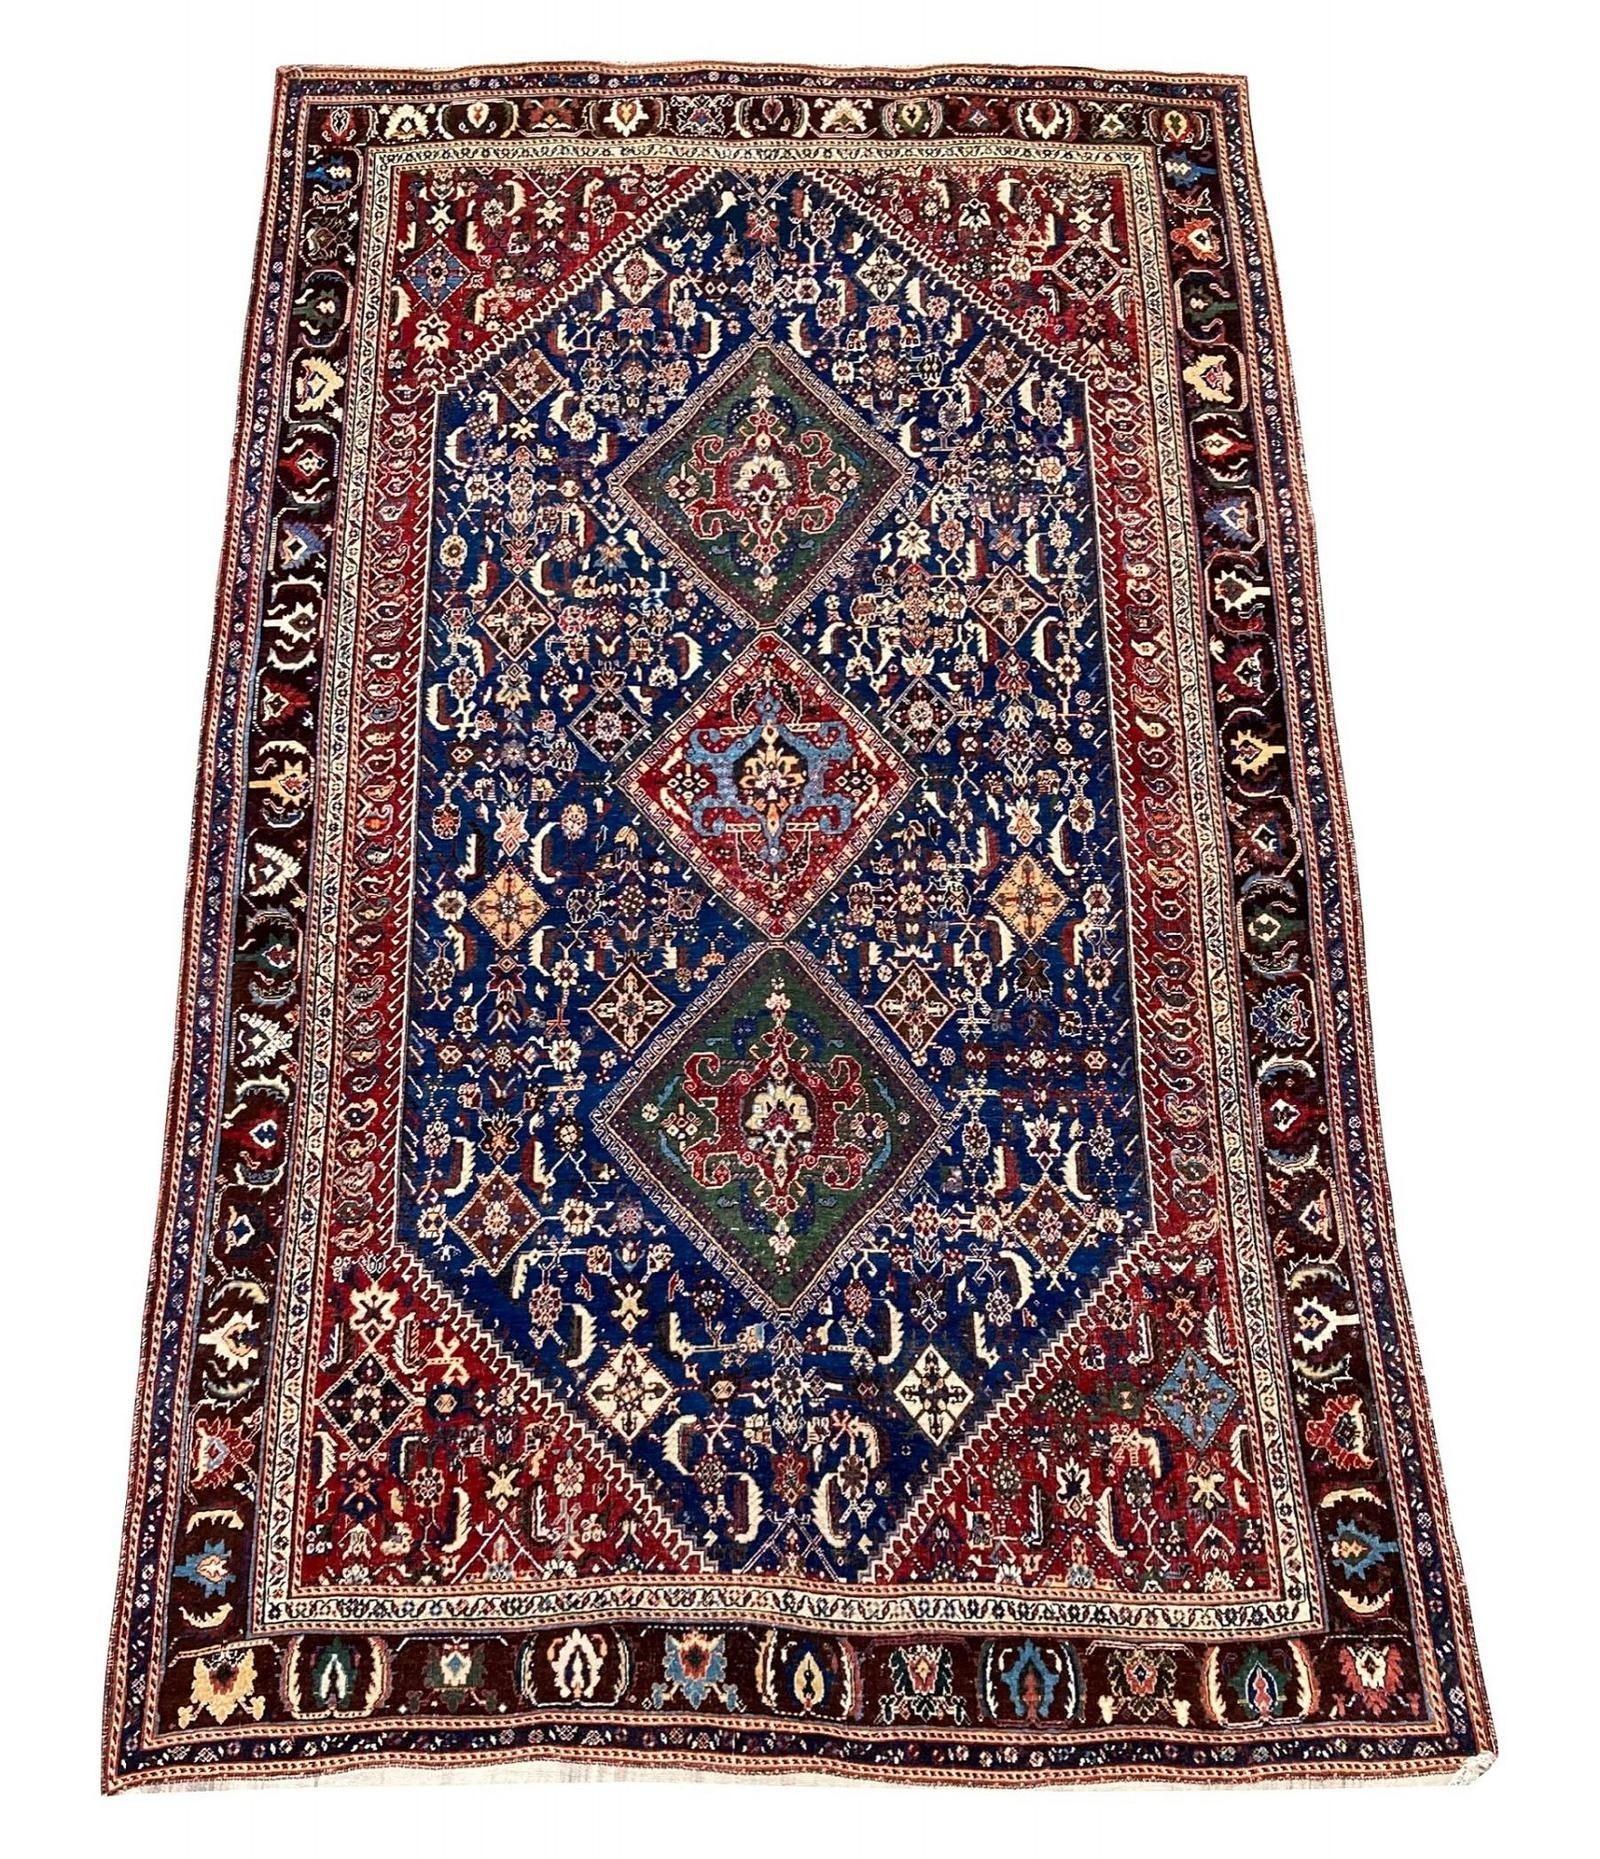 A fabulous antique Qashqai rug, handwoven by the eponymous nomadic tribe circa 1910 with a 3 medallion design on a mid blue field and great secondary colours, particularly the unusual green medallions. Very finely woven.
Size: 2.62m x 1.57m (8ft 7in